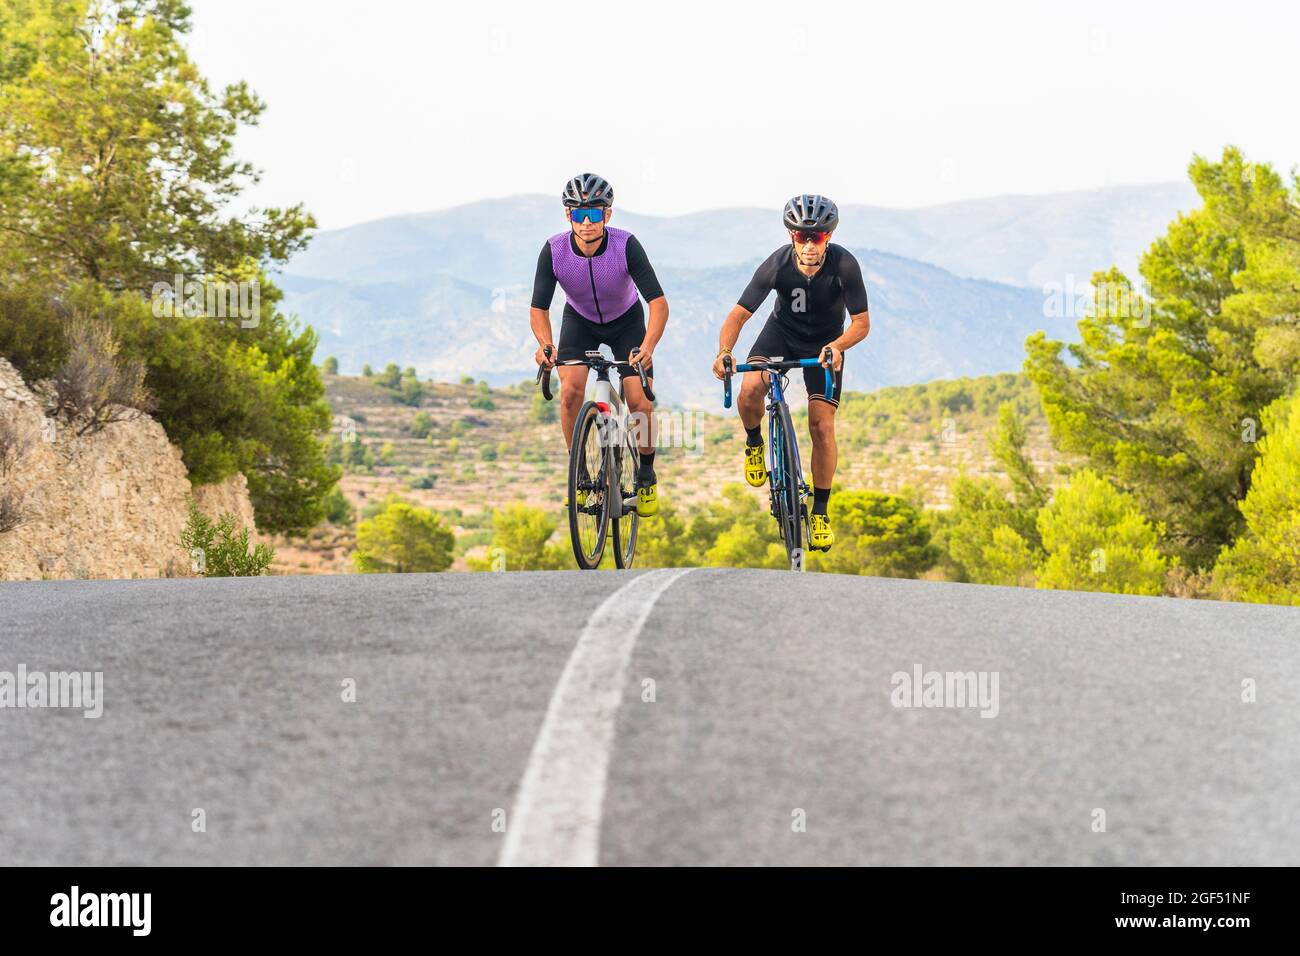 Mature male athletes cycling on road Stock Photo